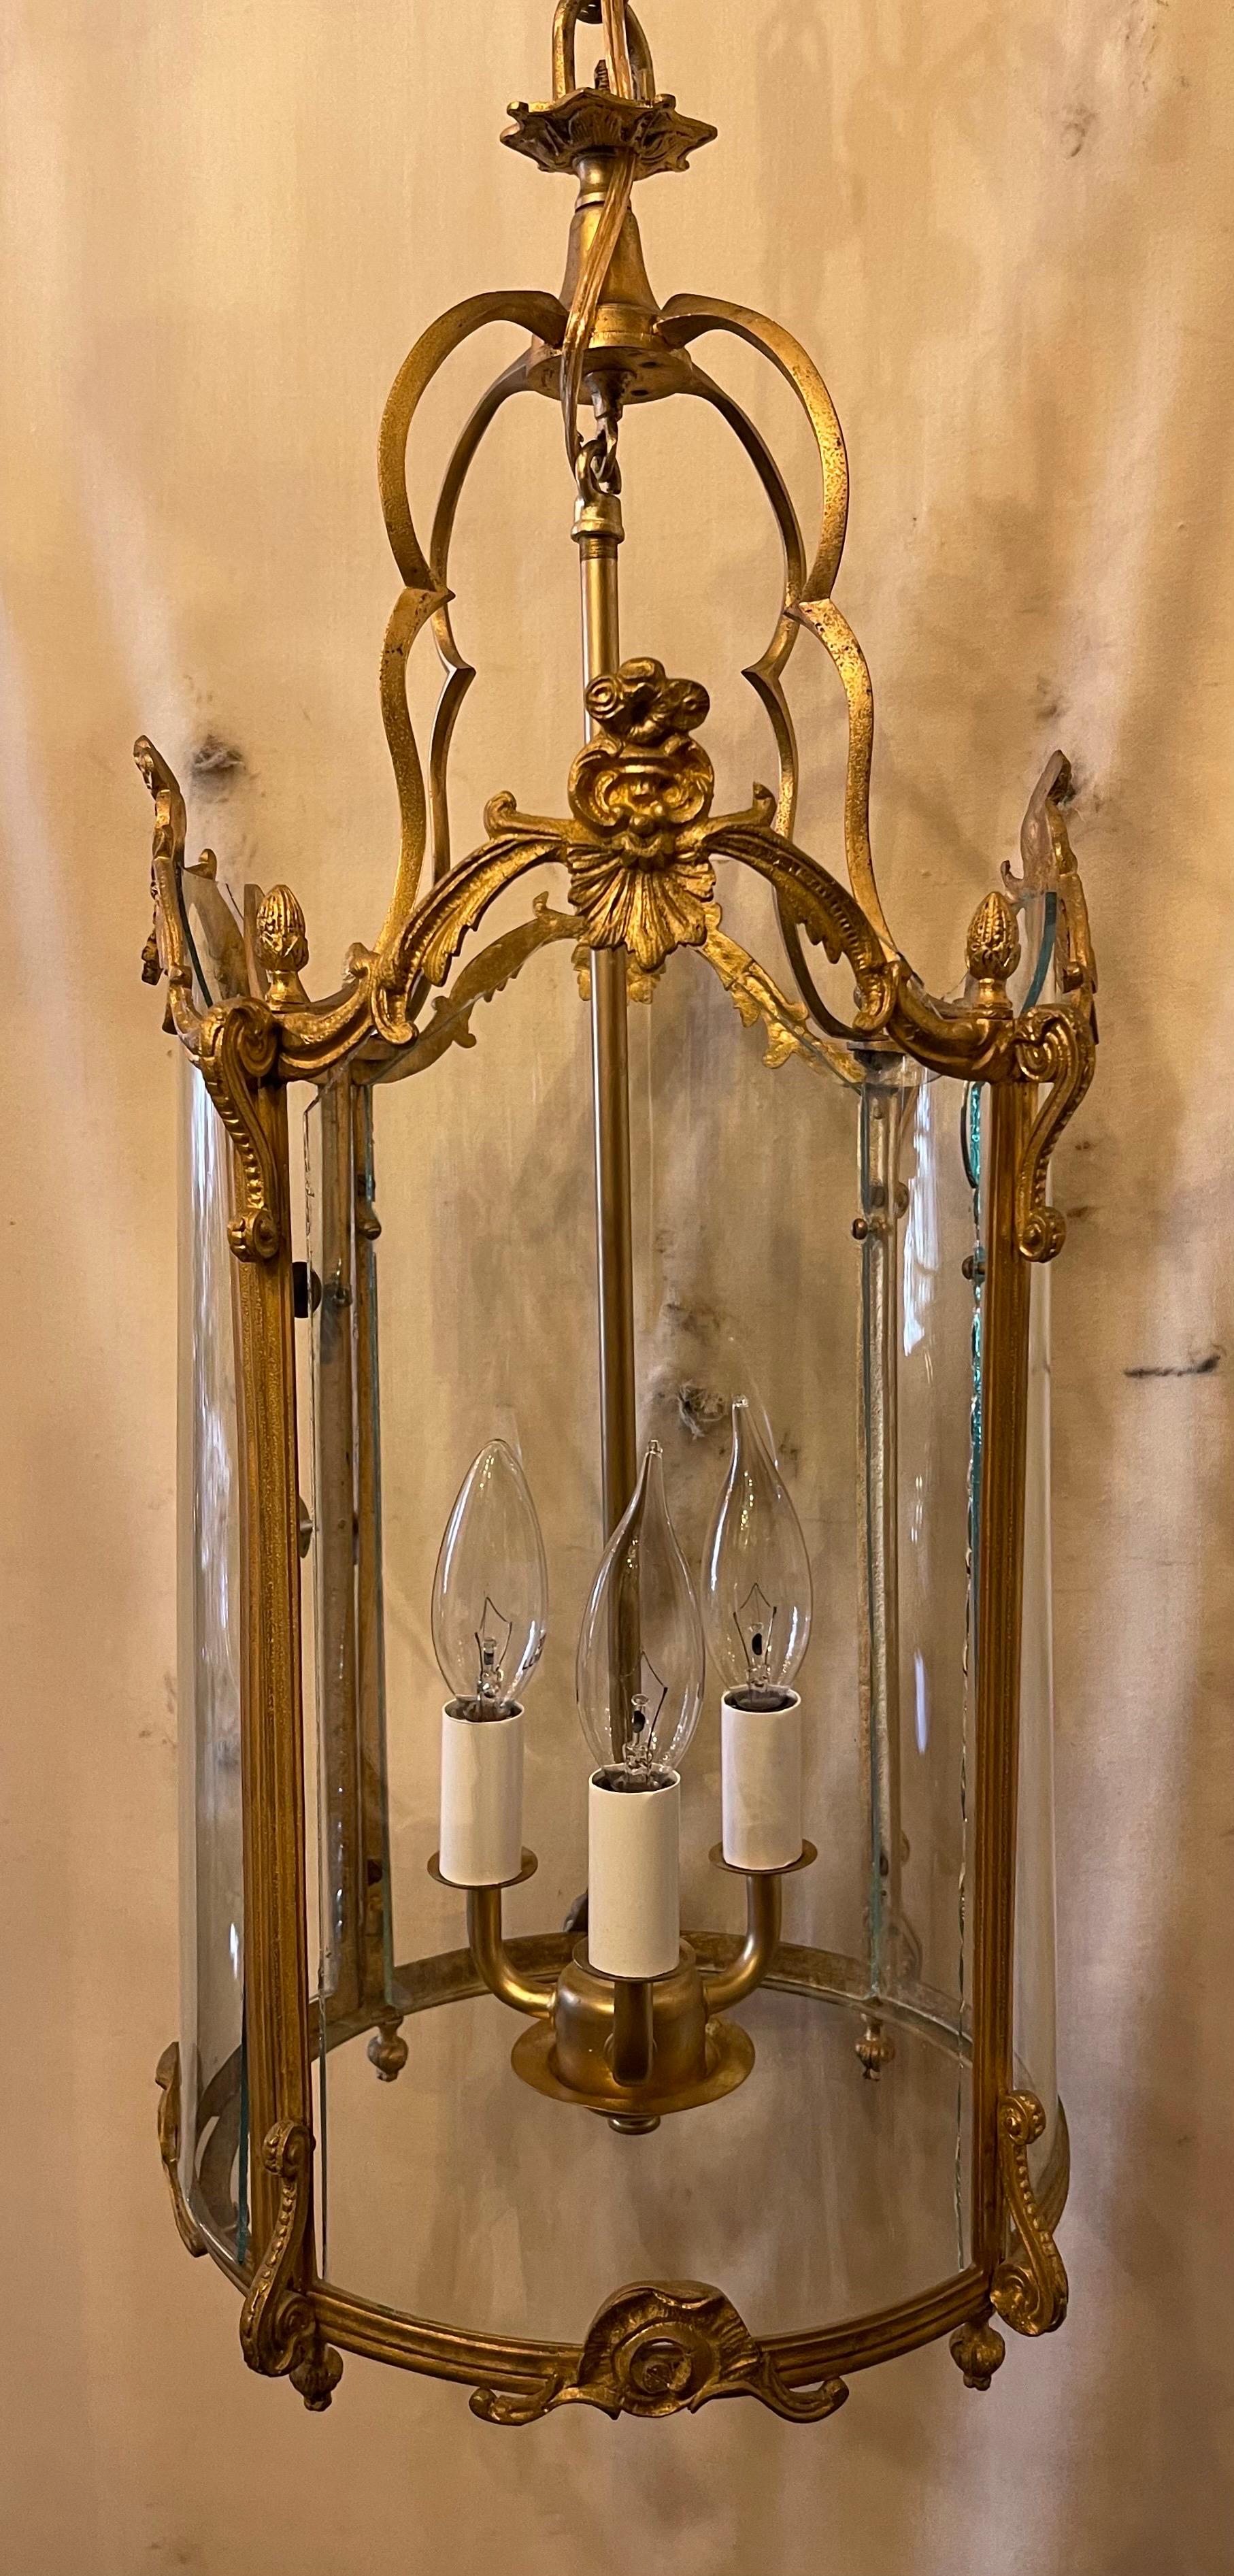 A wonderful French Dore bronze rococo Louis XV Petite lantern chandelier has been rewired with 3 candelabra lights inside a hand blown and cut curved glass housing with one door panel.
fixture comes with chain and canopy.